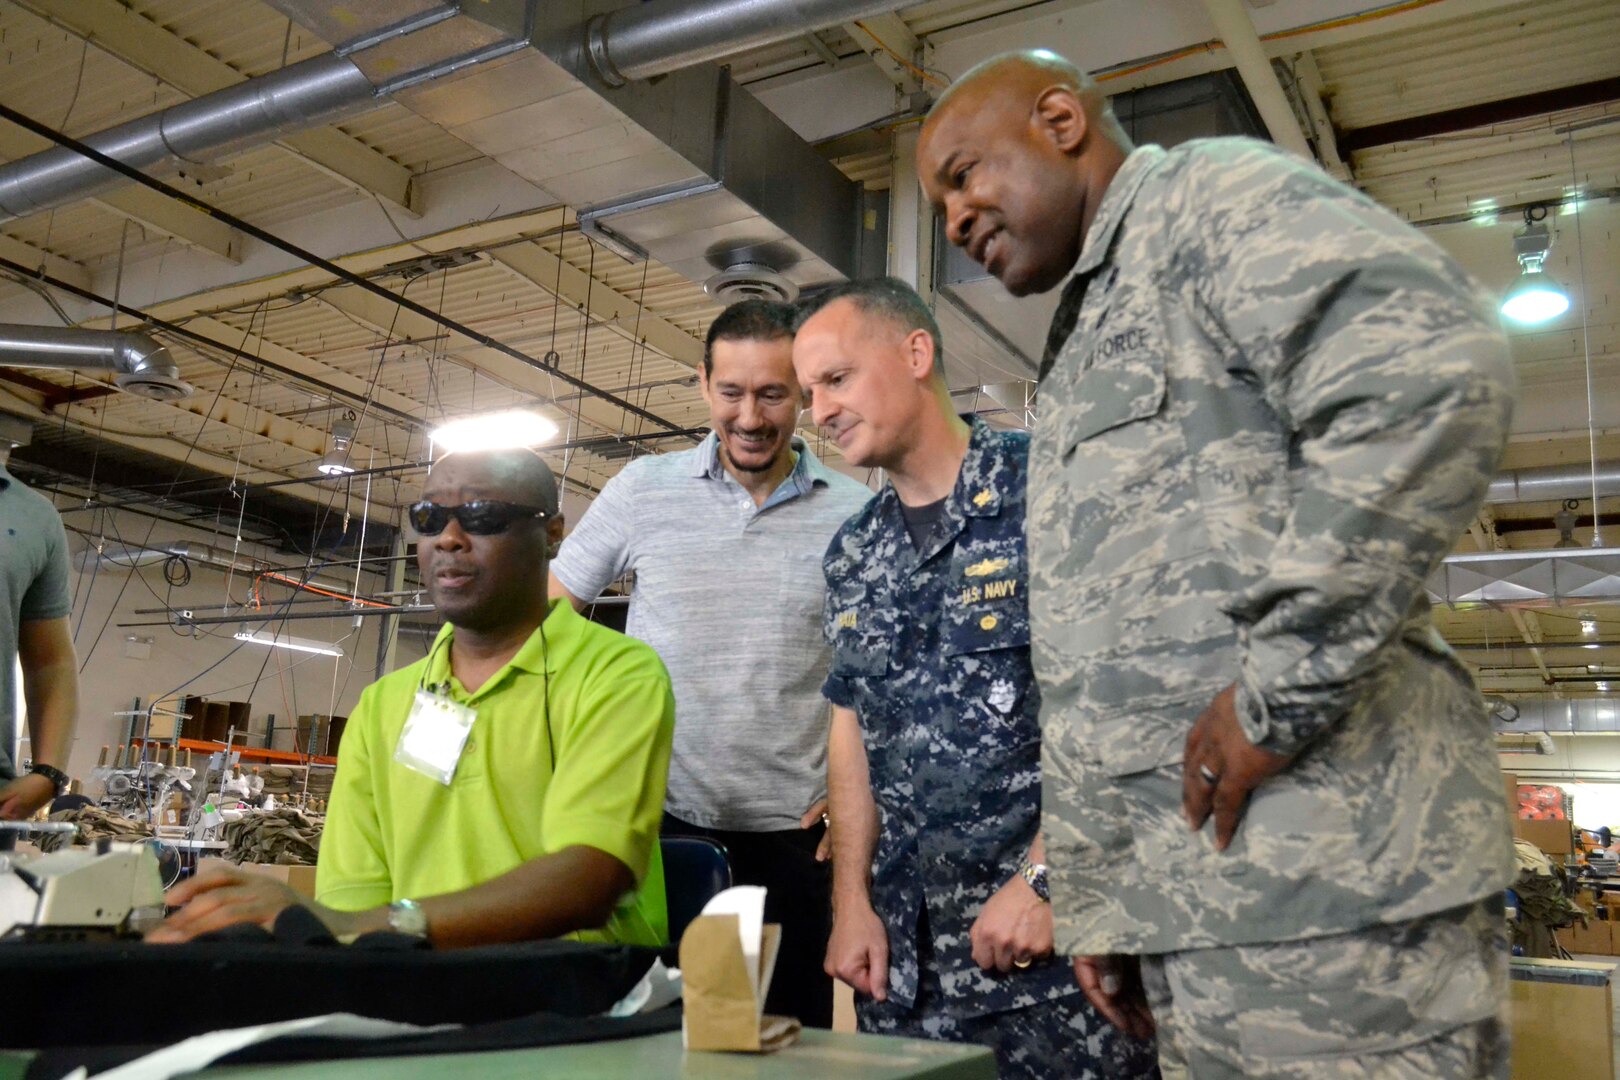 DLA Troop Support C&T Director Air Force Col. Lawrence Hicks, right, and Procurement Process Support Director Navy Capt. Gerald Raia, second right, watch Bestwork Industries for the Blind worker James Woodson, left, sew a Navy fleece jacket with Bestwork production supervisor Carlos Benjumea, in Cherry Hill, New Jersey Sept. 28. Raia, Hicks and C&T Supplier Operations Director Steve Merch, who also attended the visit, were impressed with the synergy of employees on the production line. 